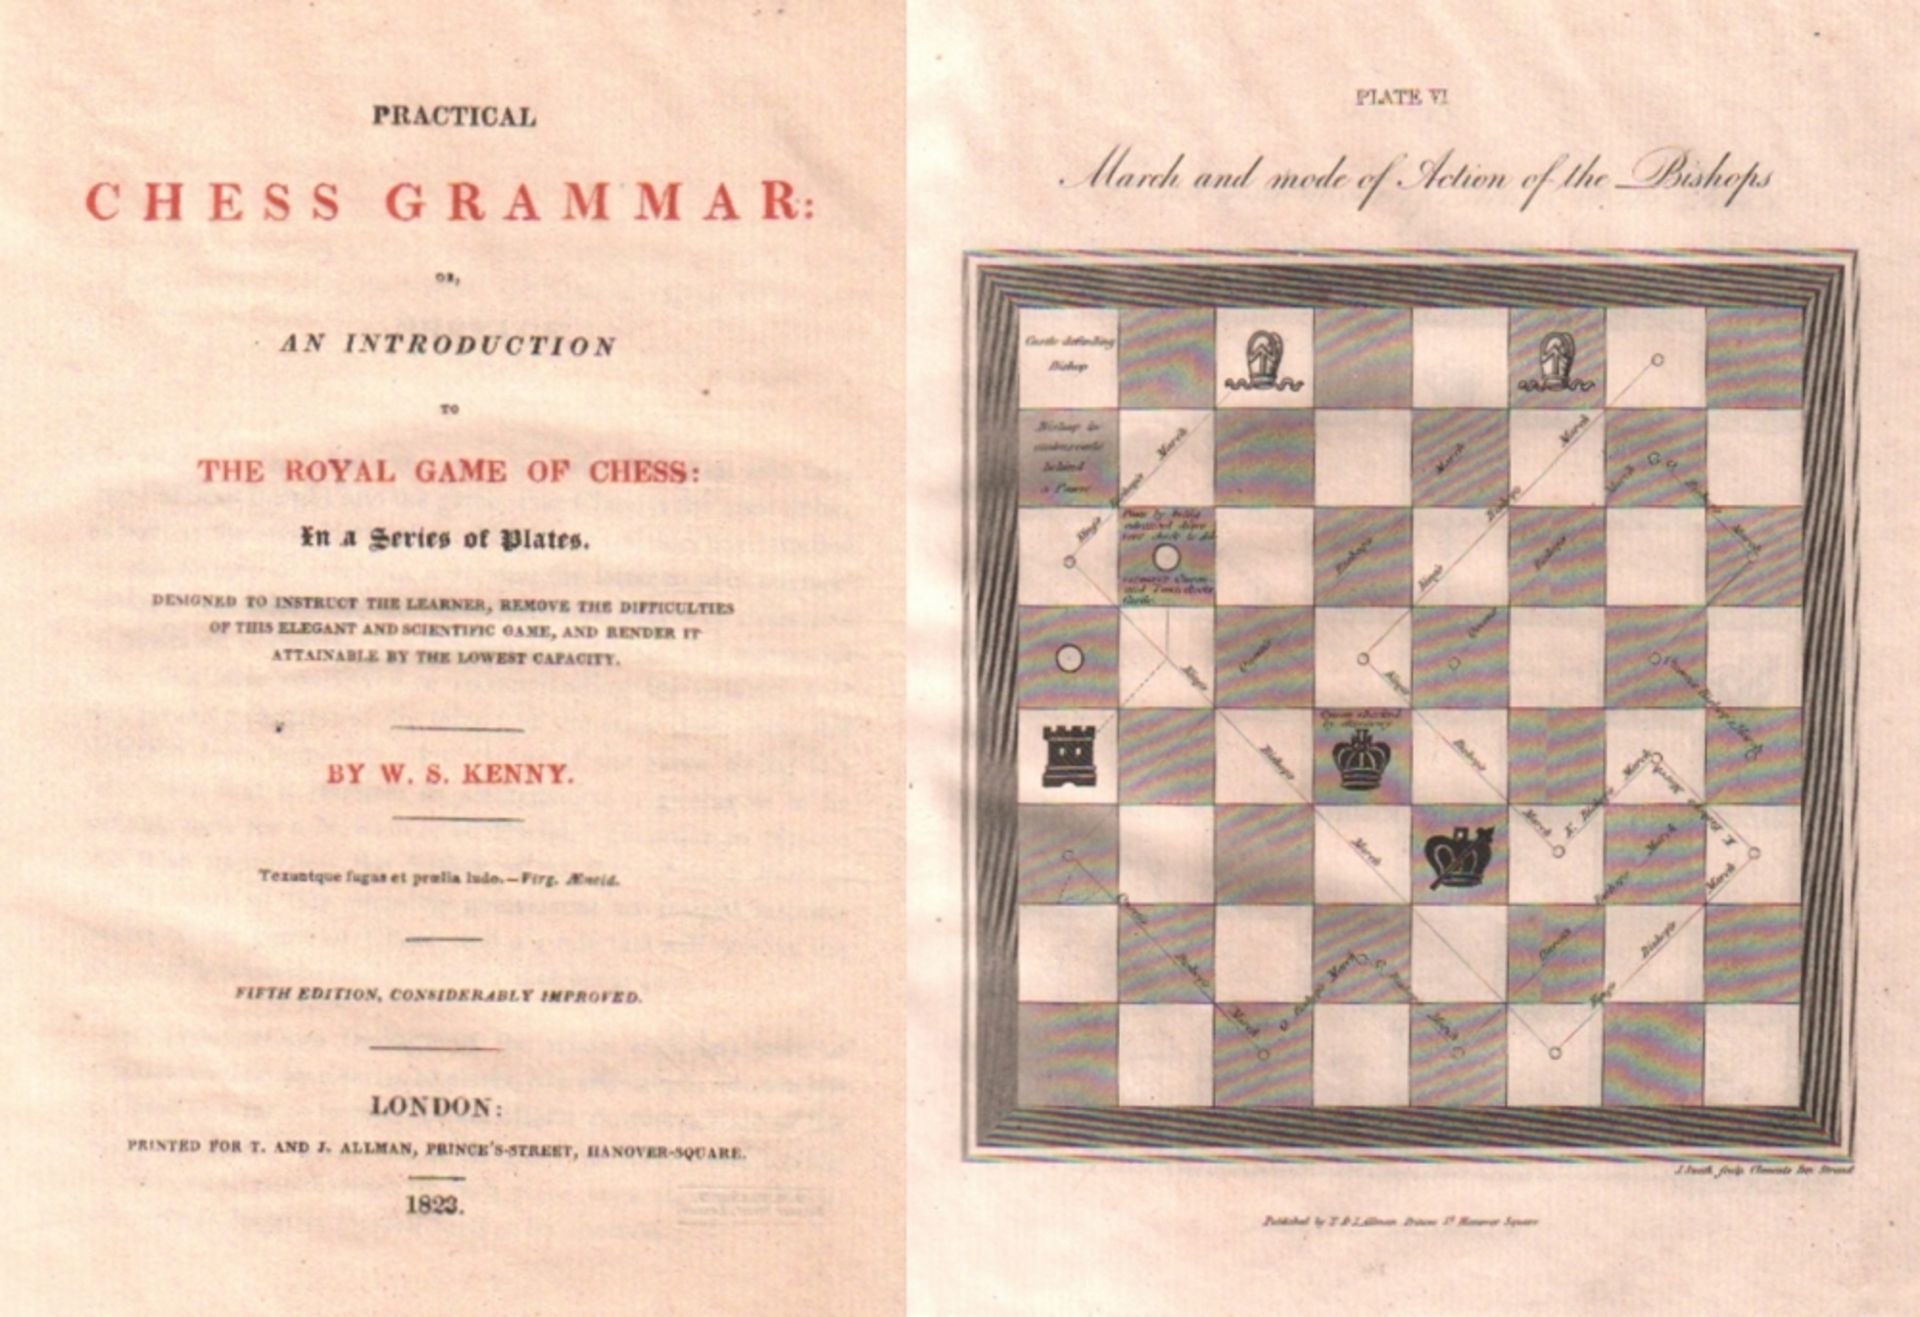 Kenny, W(illiam) S(topford). Practical chess grammar: or, an introduction to the royal game of